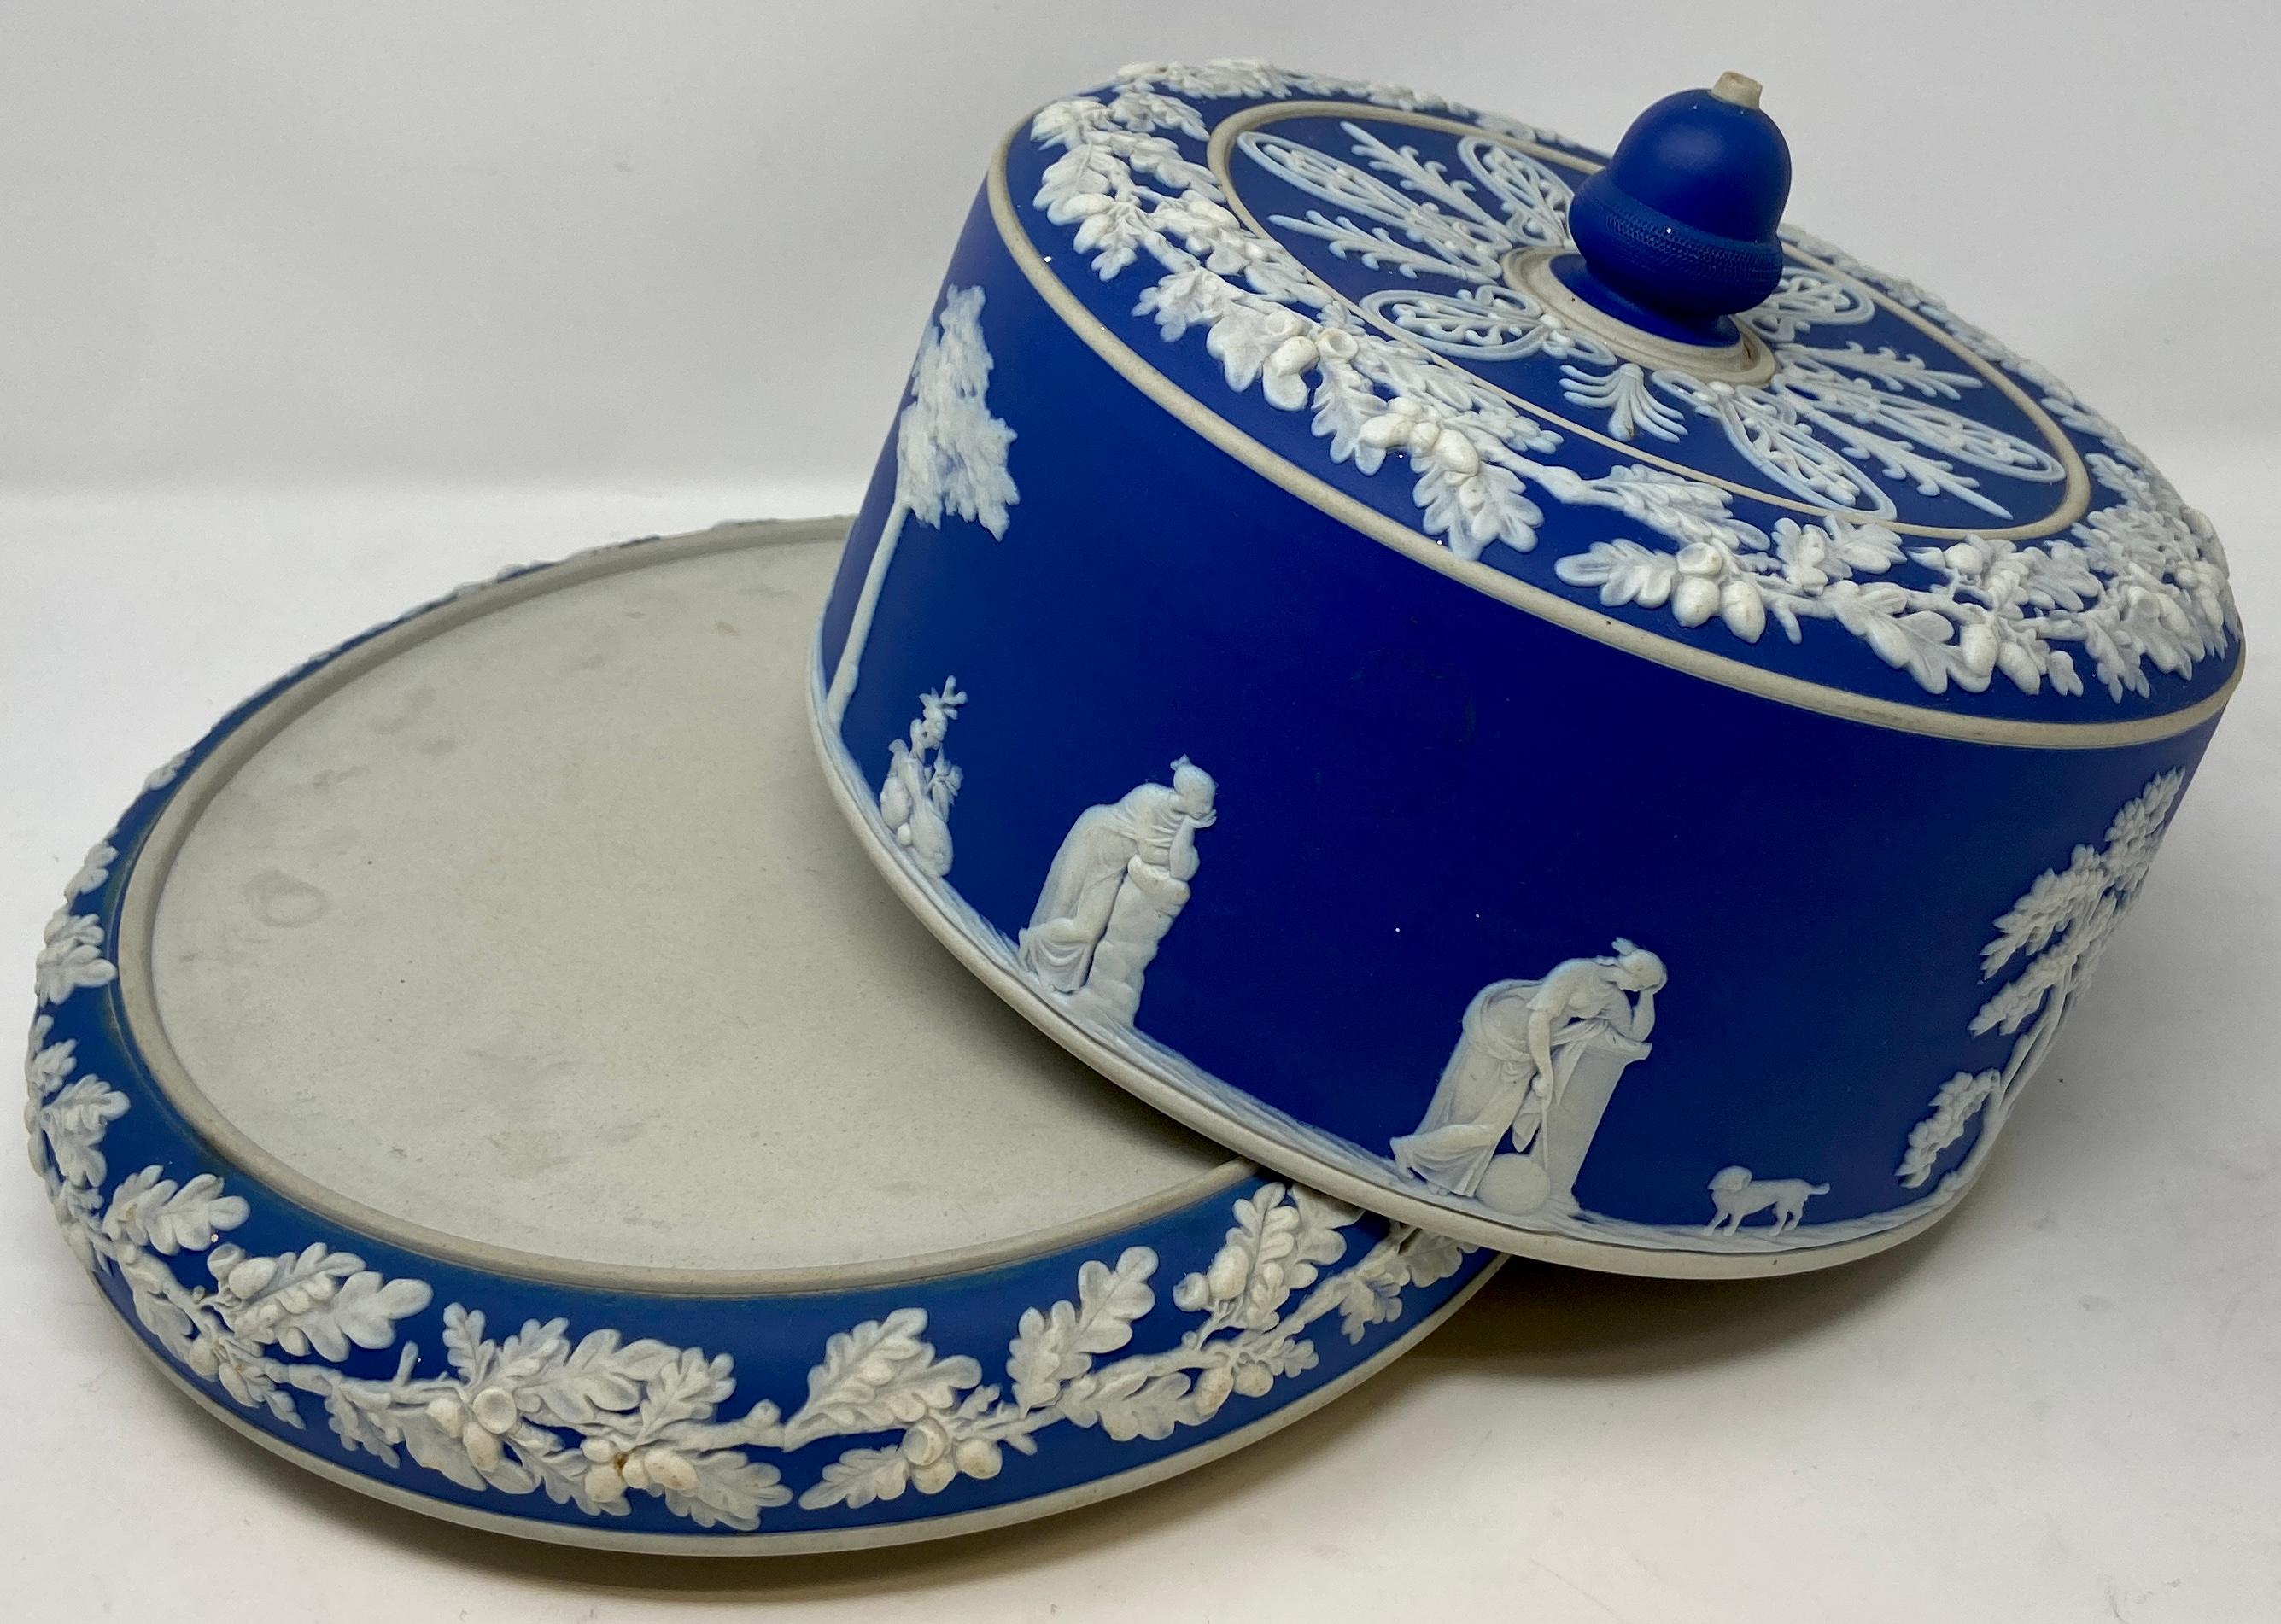 20th Century Antique English Porcelain Covered Cheese or Cake Dish, circa 1910-1915